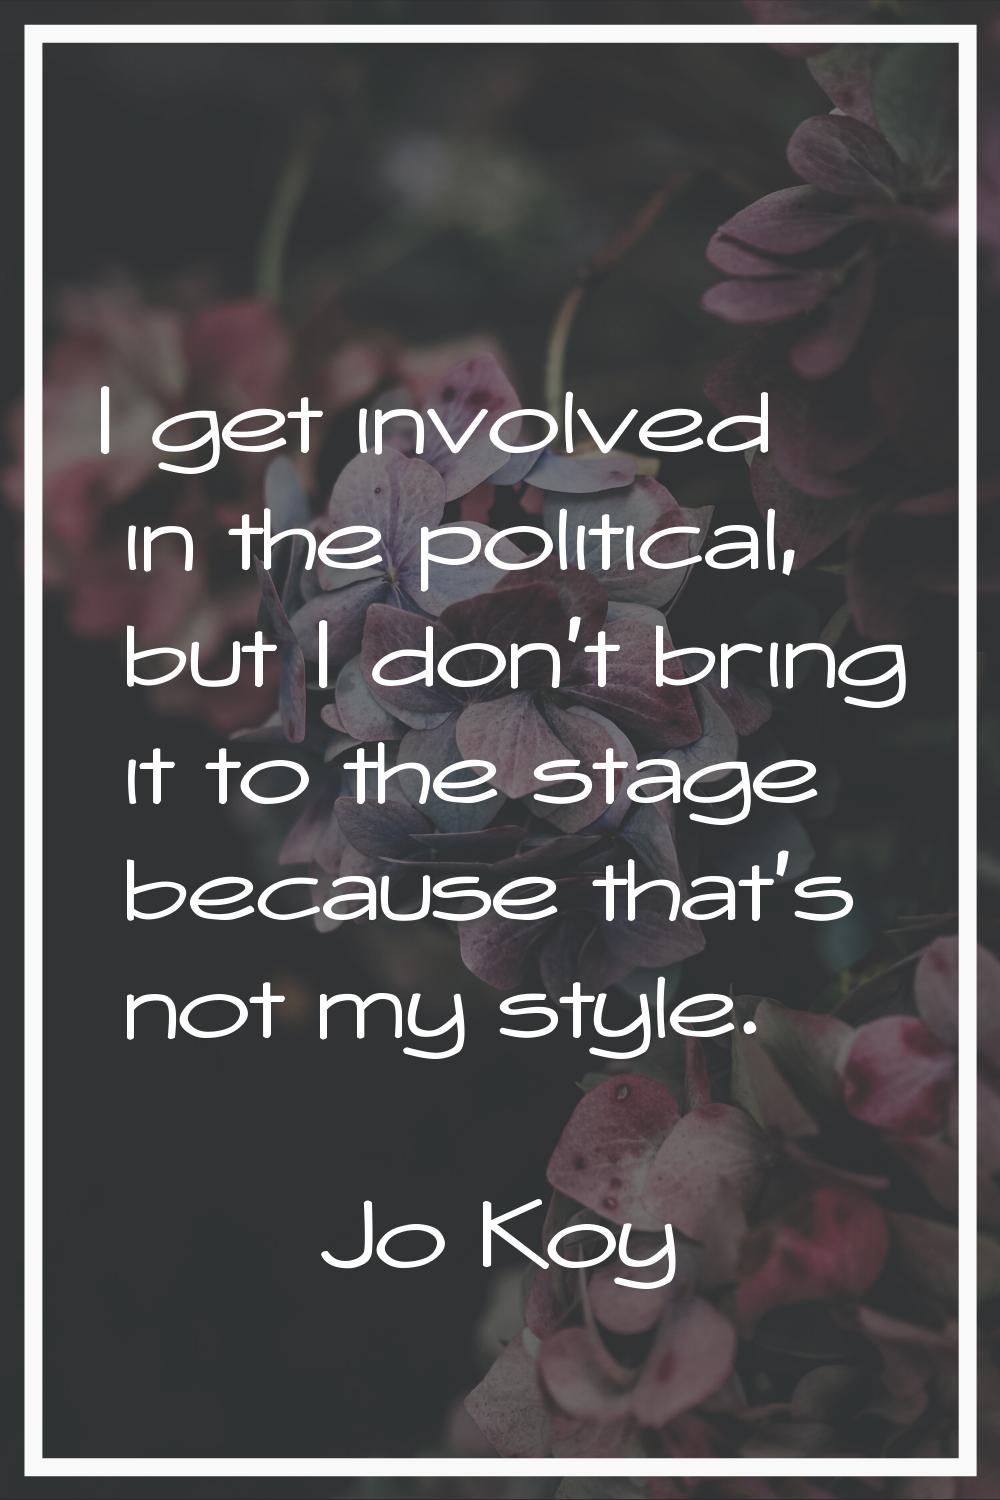 I get involved in the political, but I don't bring it to the stage because that's not my style.